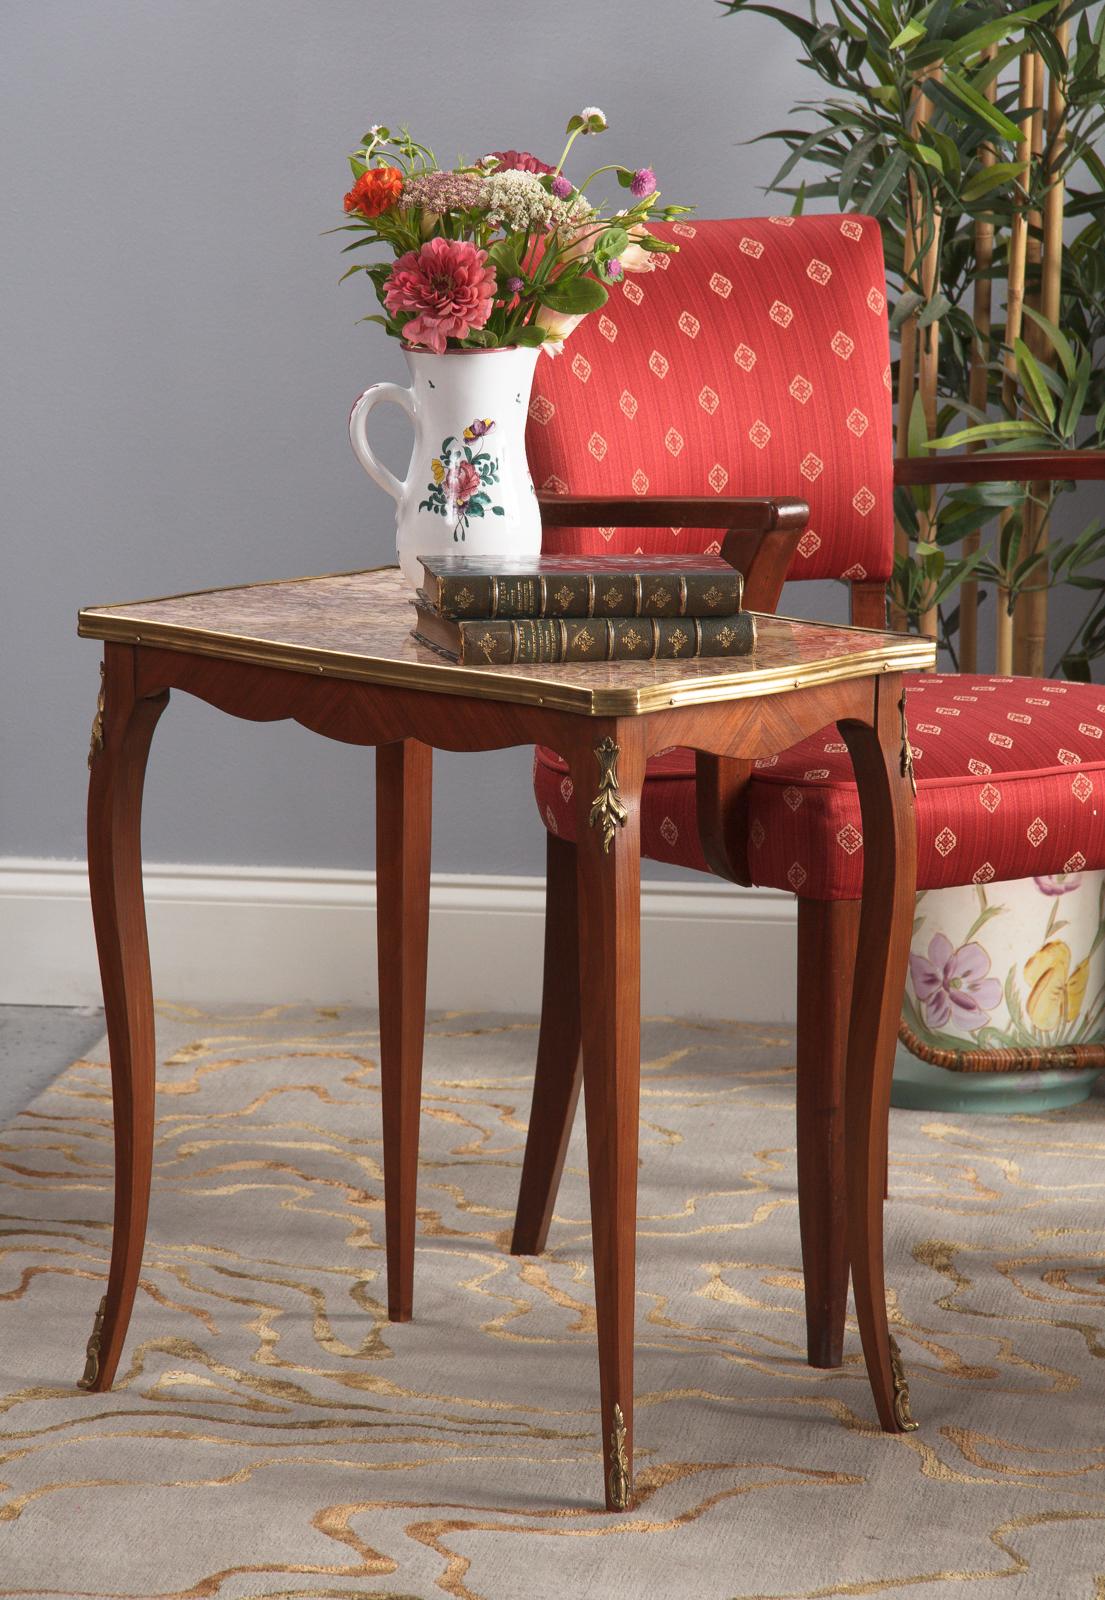 A dainty vintage Louis XV style side table with Breche marble-top, French, circa 1940. Cherrywood veneer base with cream and blush Breche marble-top trimmed in brass. Curved, attenuated legs are tipped in scrolled acanthus brass sabots with matching